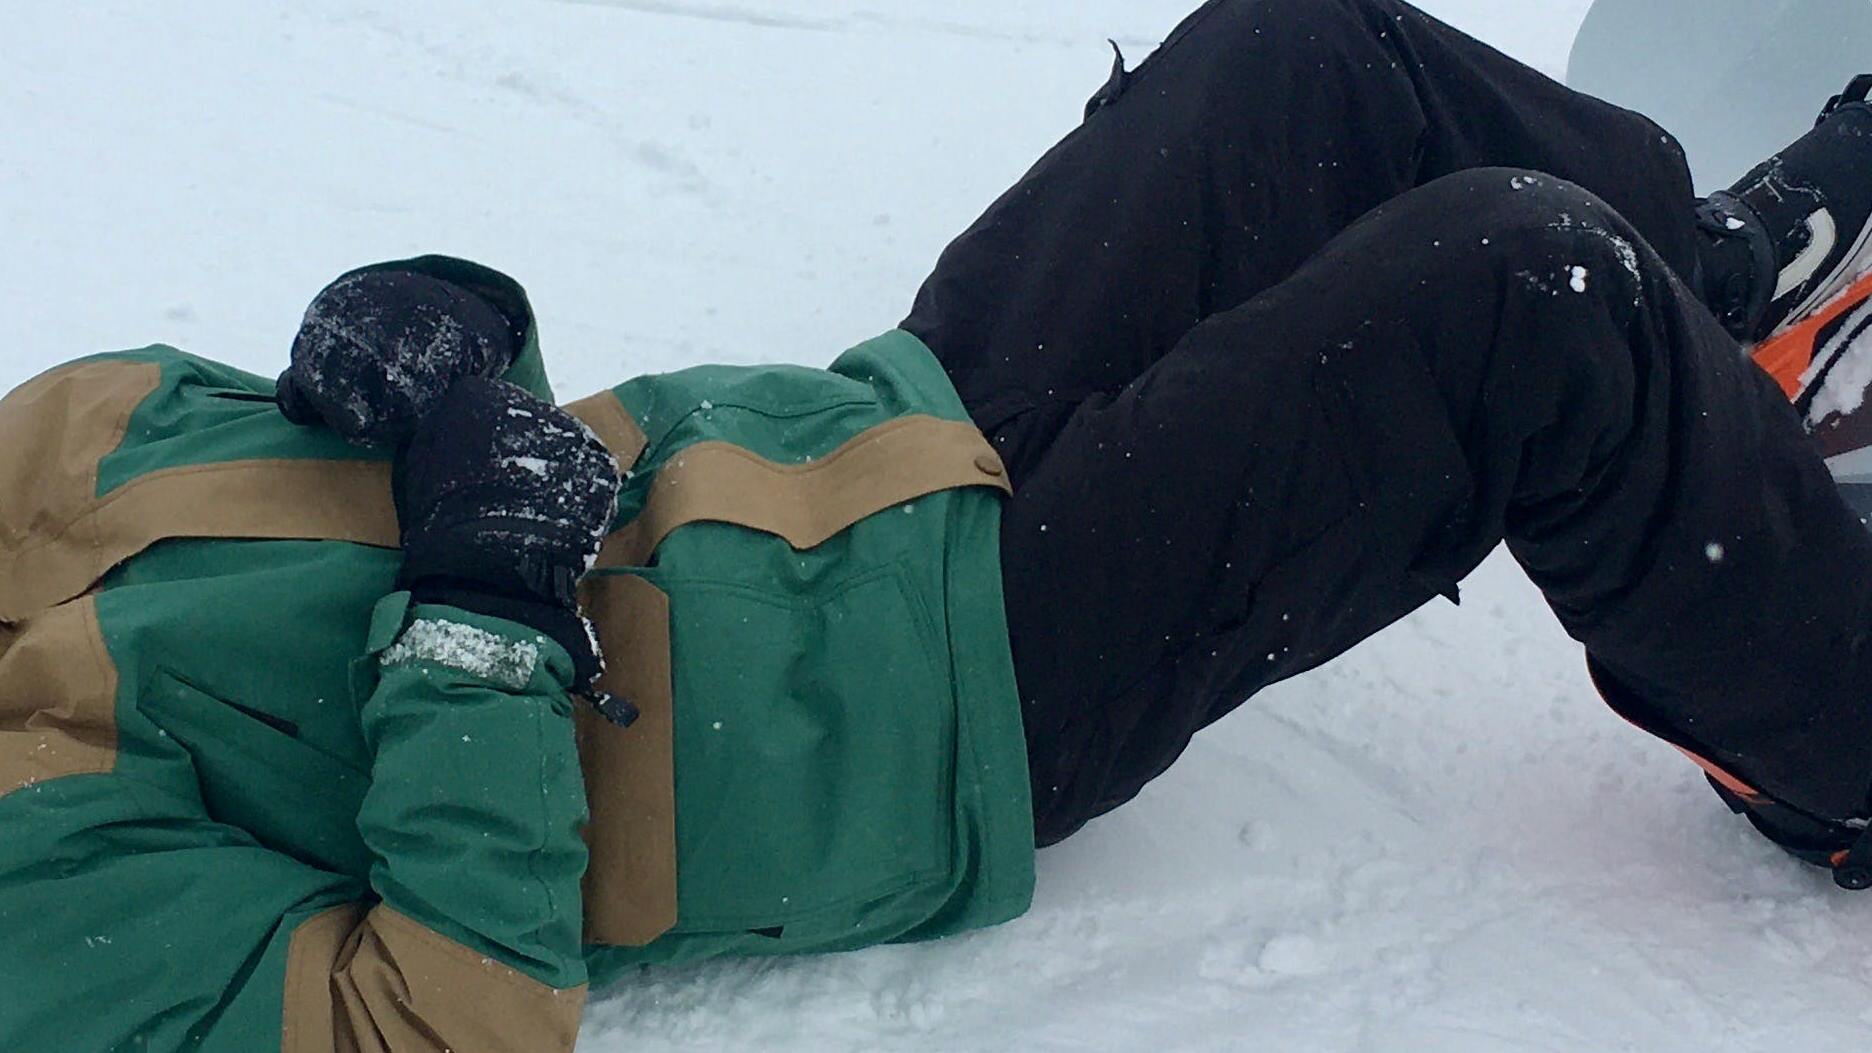 The author laying in the snow with his winter jacket on.